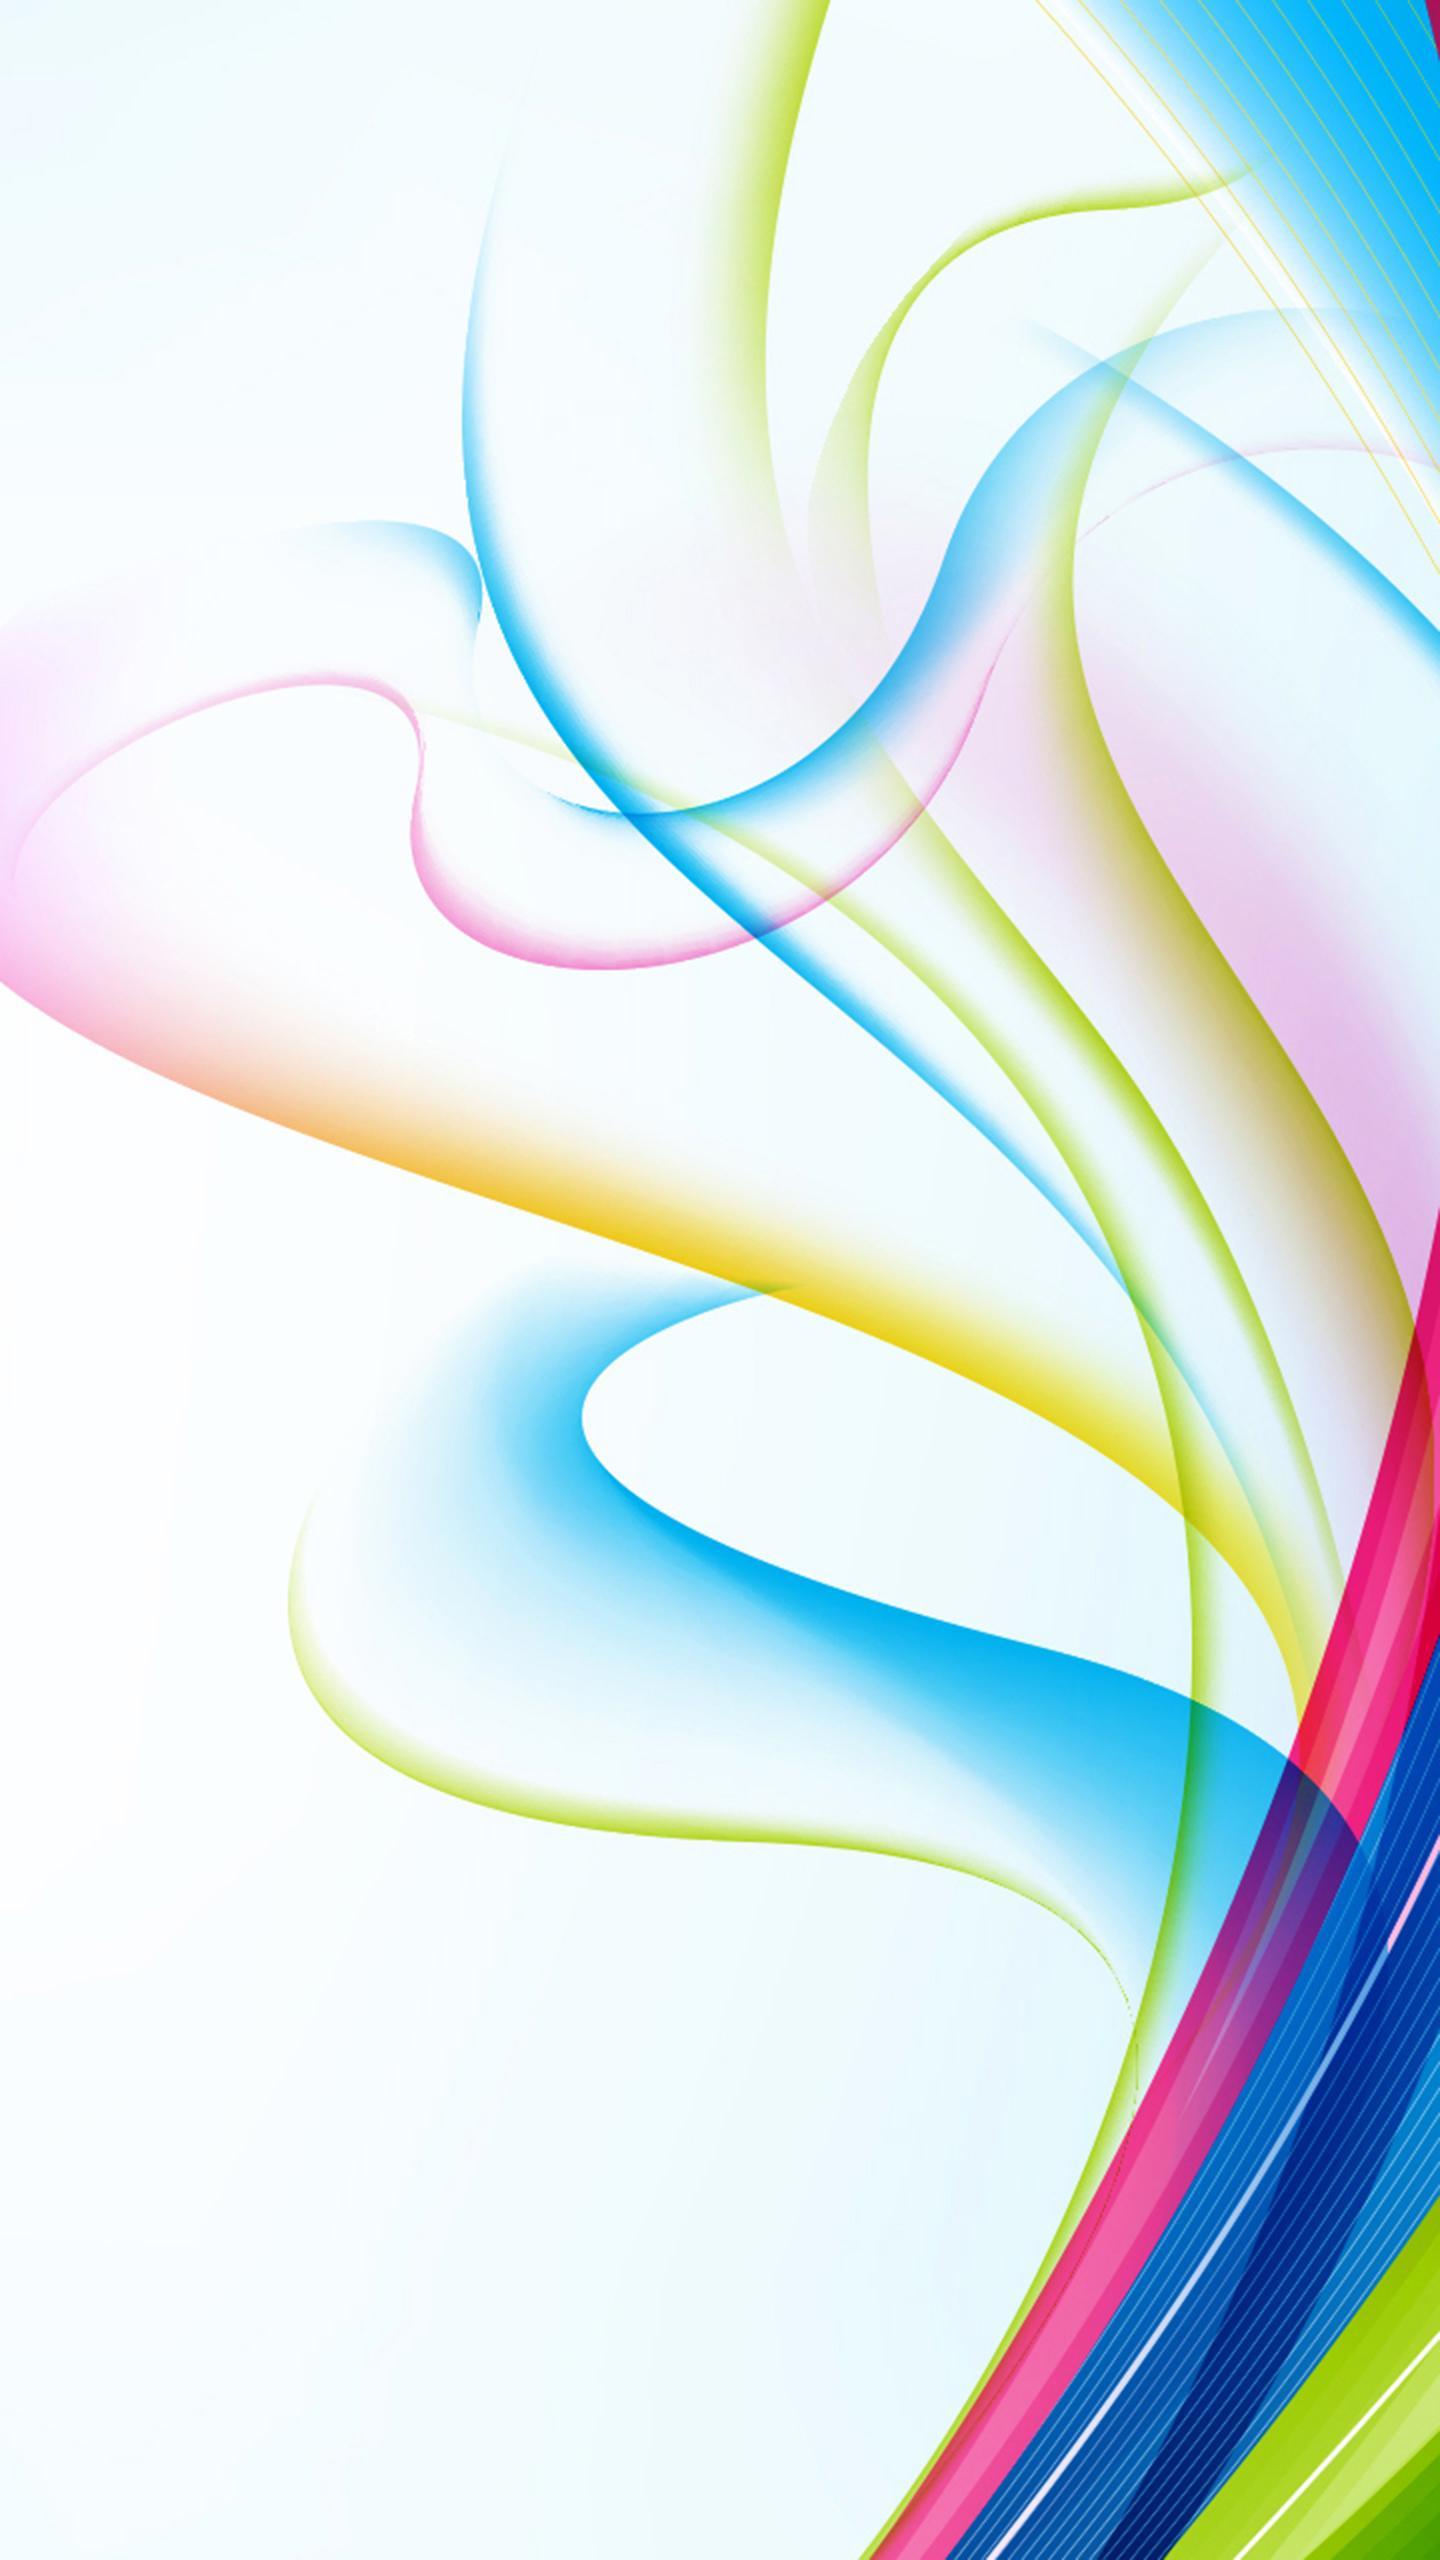 Panasonic Wallpaper For Android Apk Download